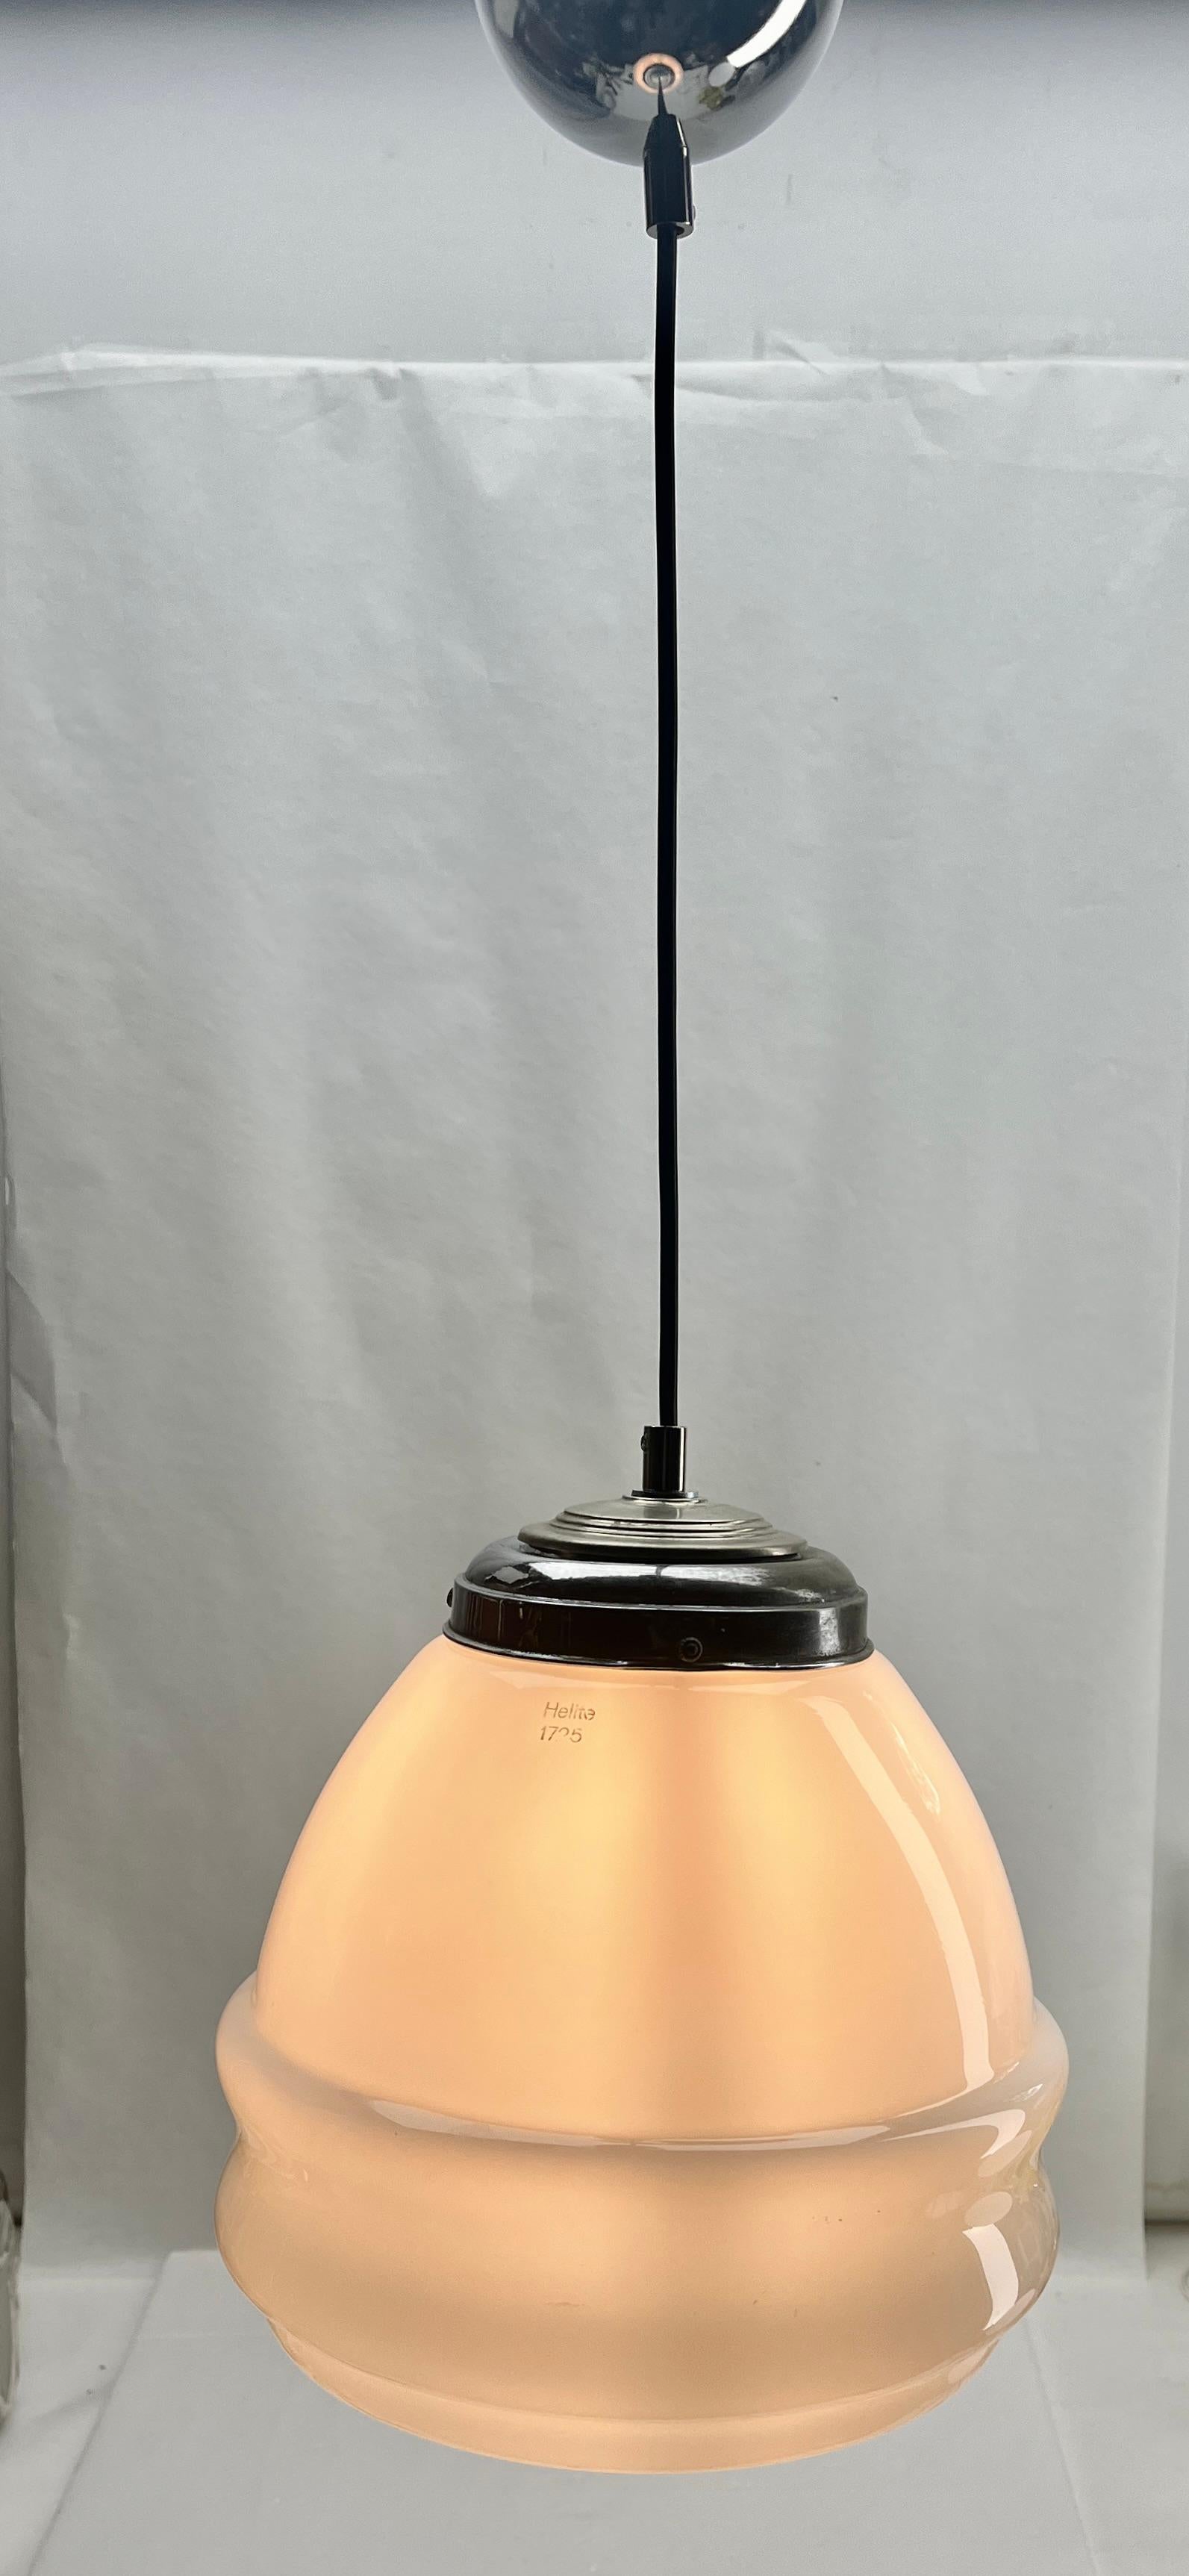 Helite Pendant Lamp with a Opaline Shade and Chrome Fittings, 1930s  For Sale 5